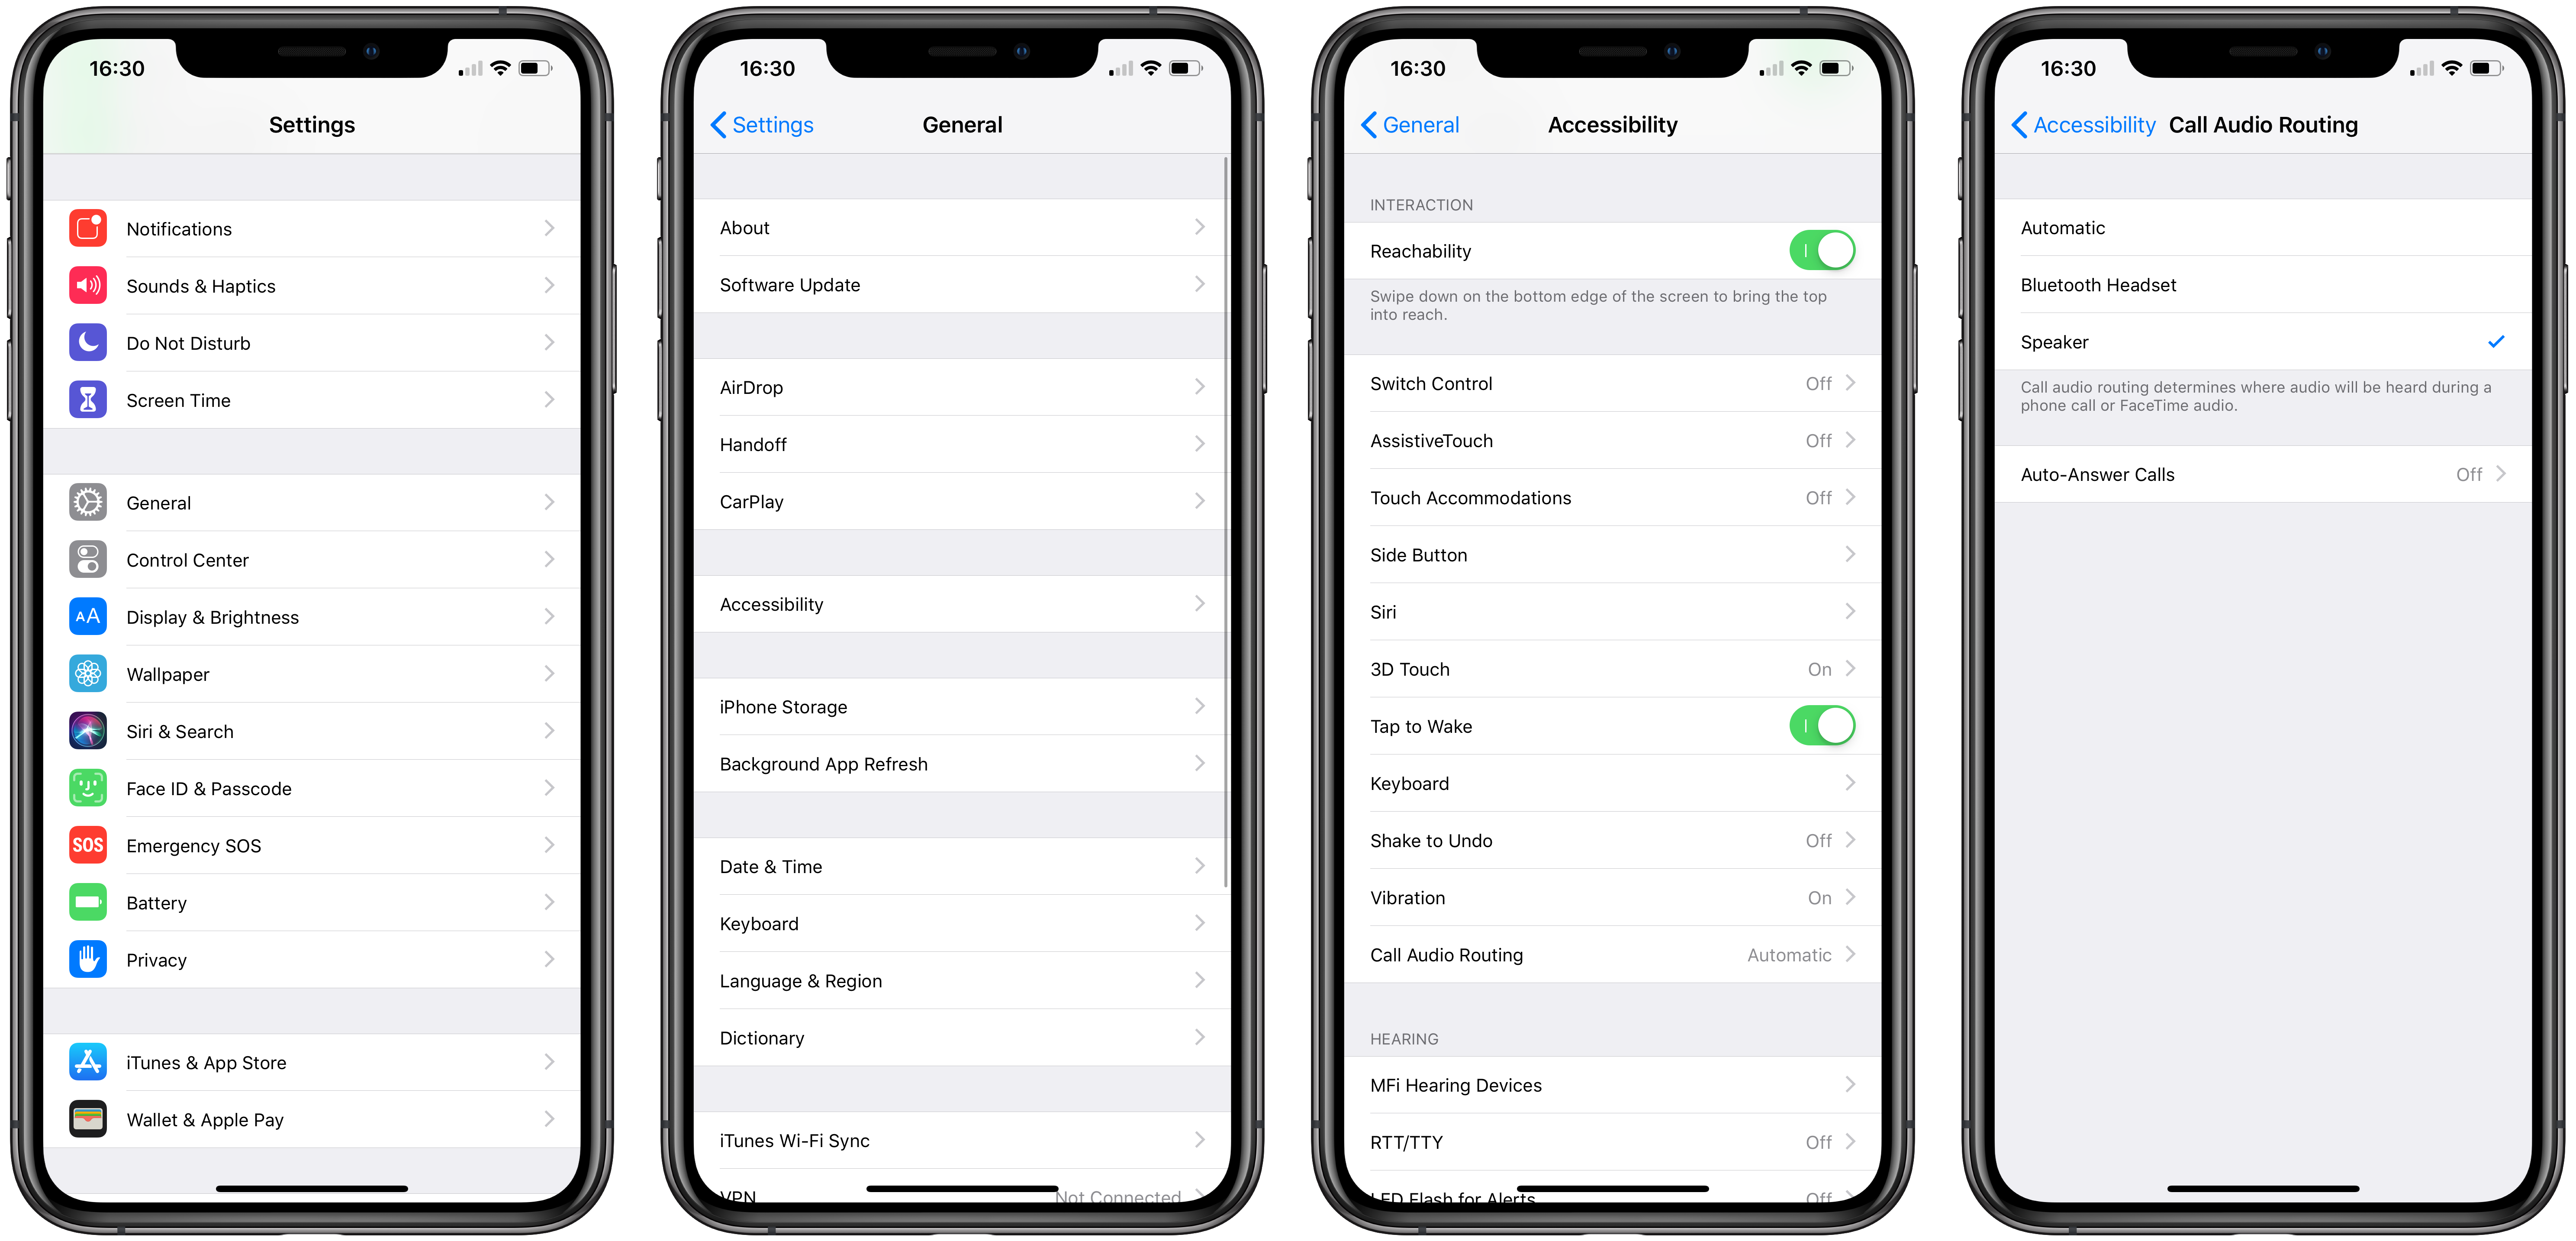 How to automatically speakerphone on iPhone when taking a call